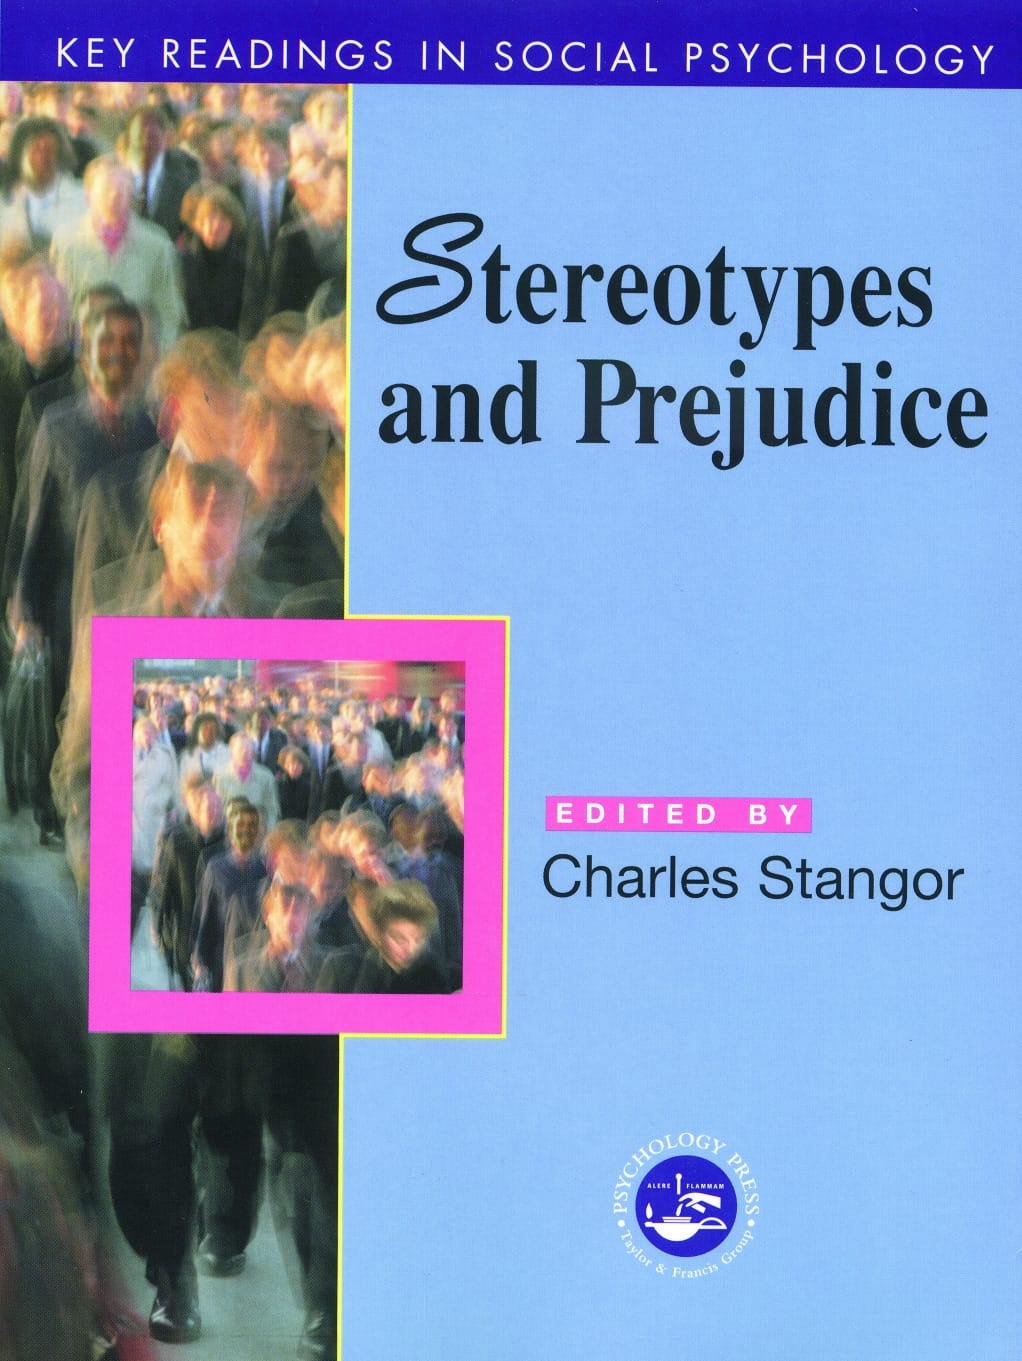 Stereotypes and Prejudice: Essential Readings